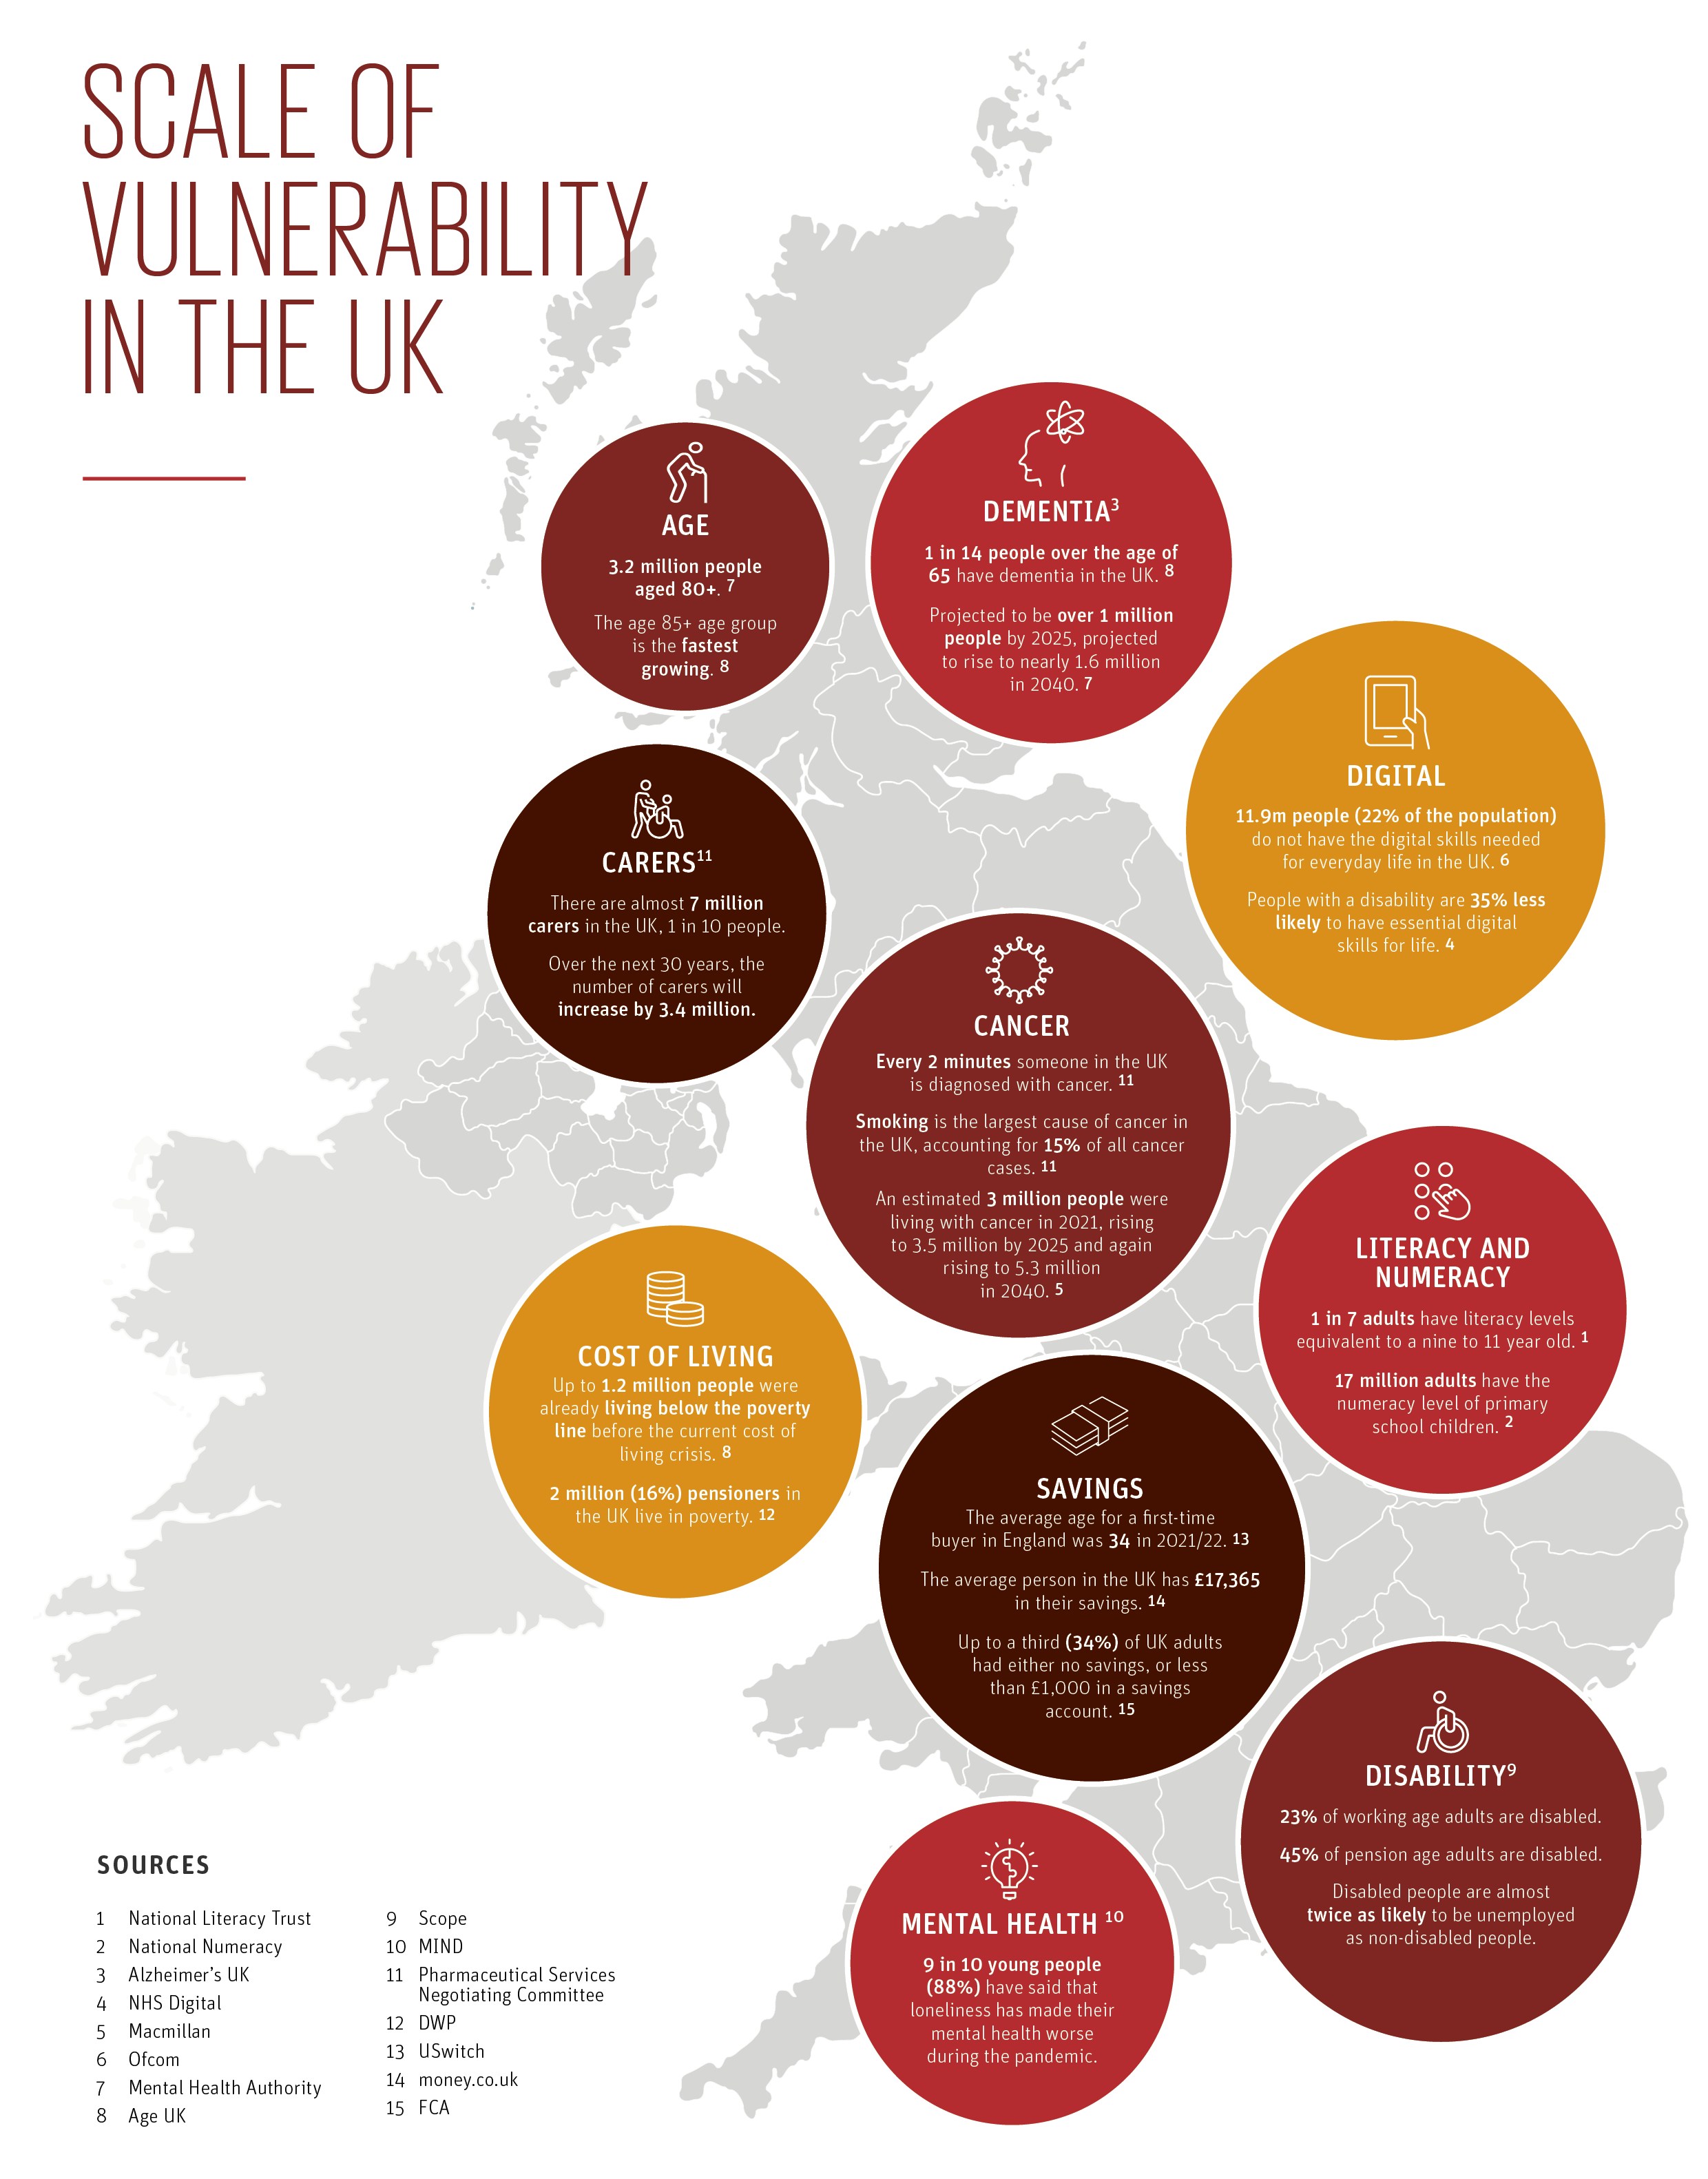 Scale of vulnerability in the UK infographic